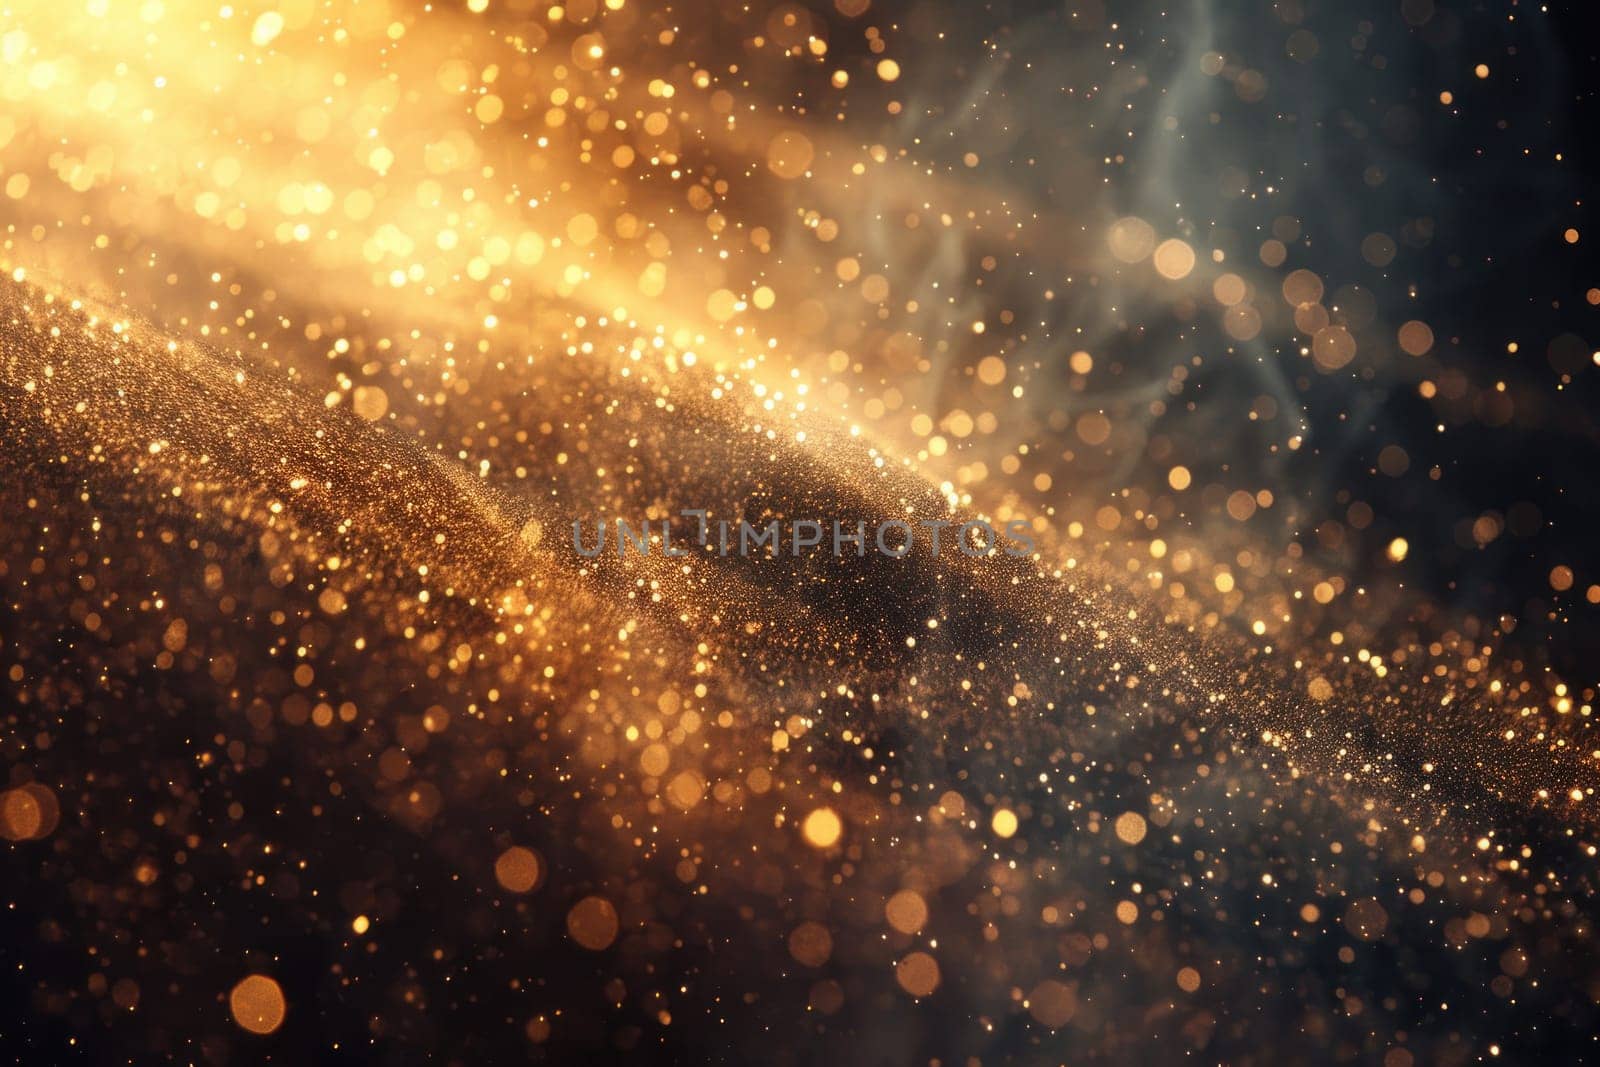 The image is a blurry, hazy, and dreamy scene with a lot of glitter by golfmerrymaker